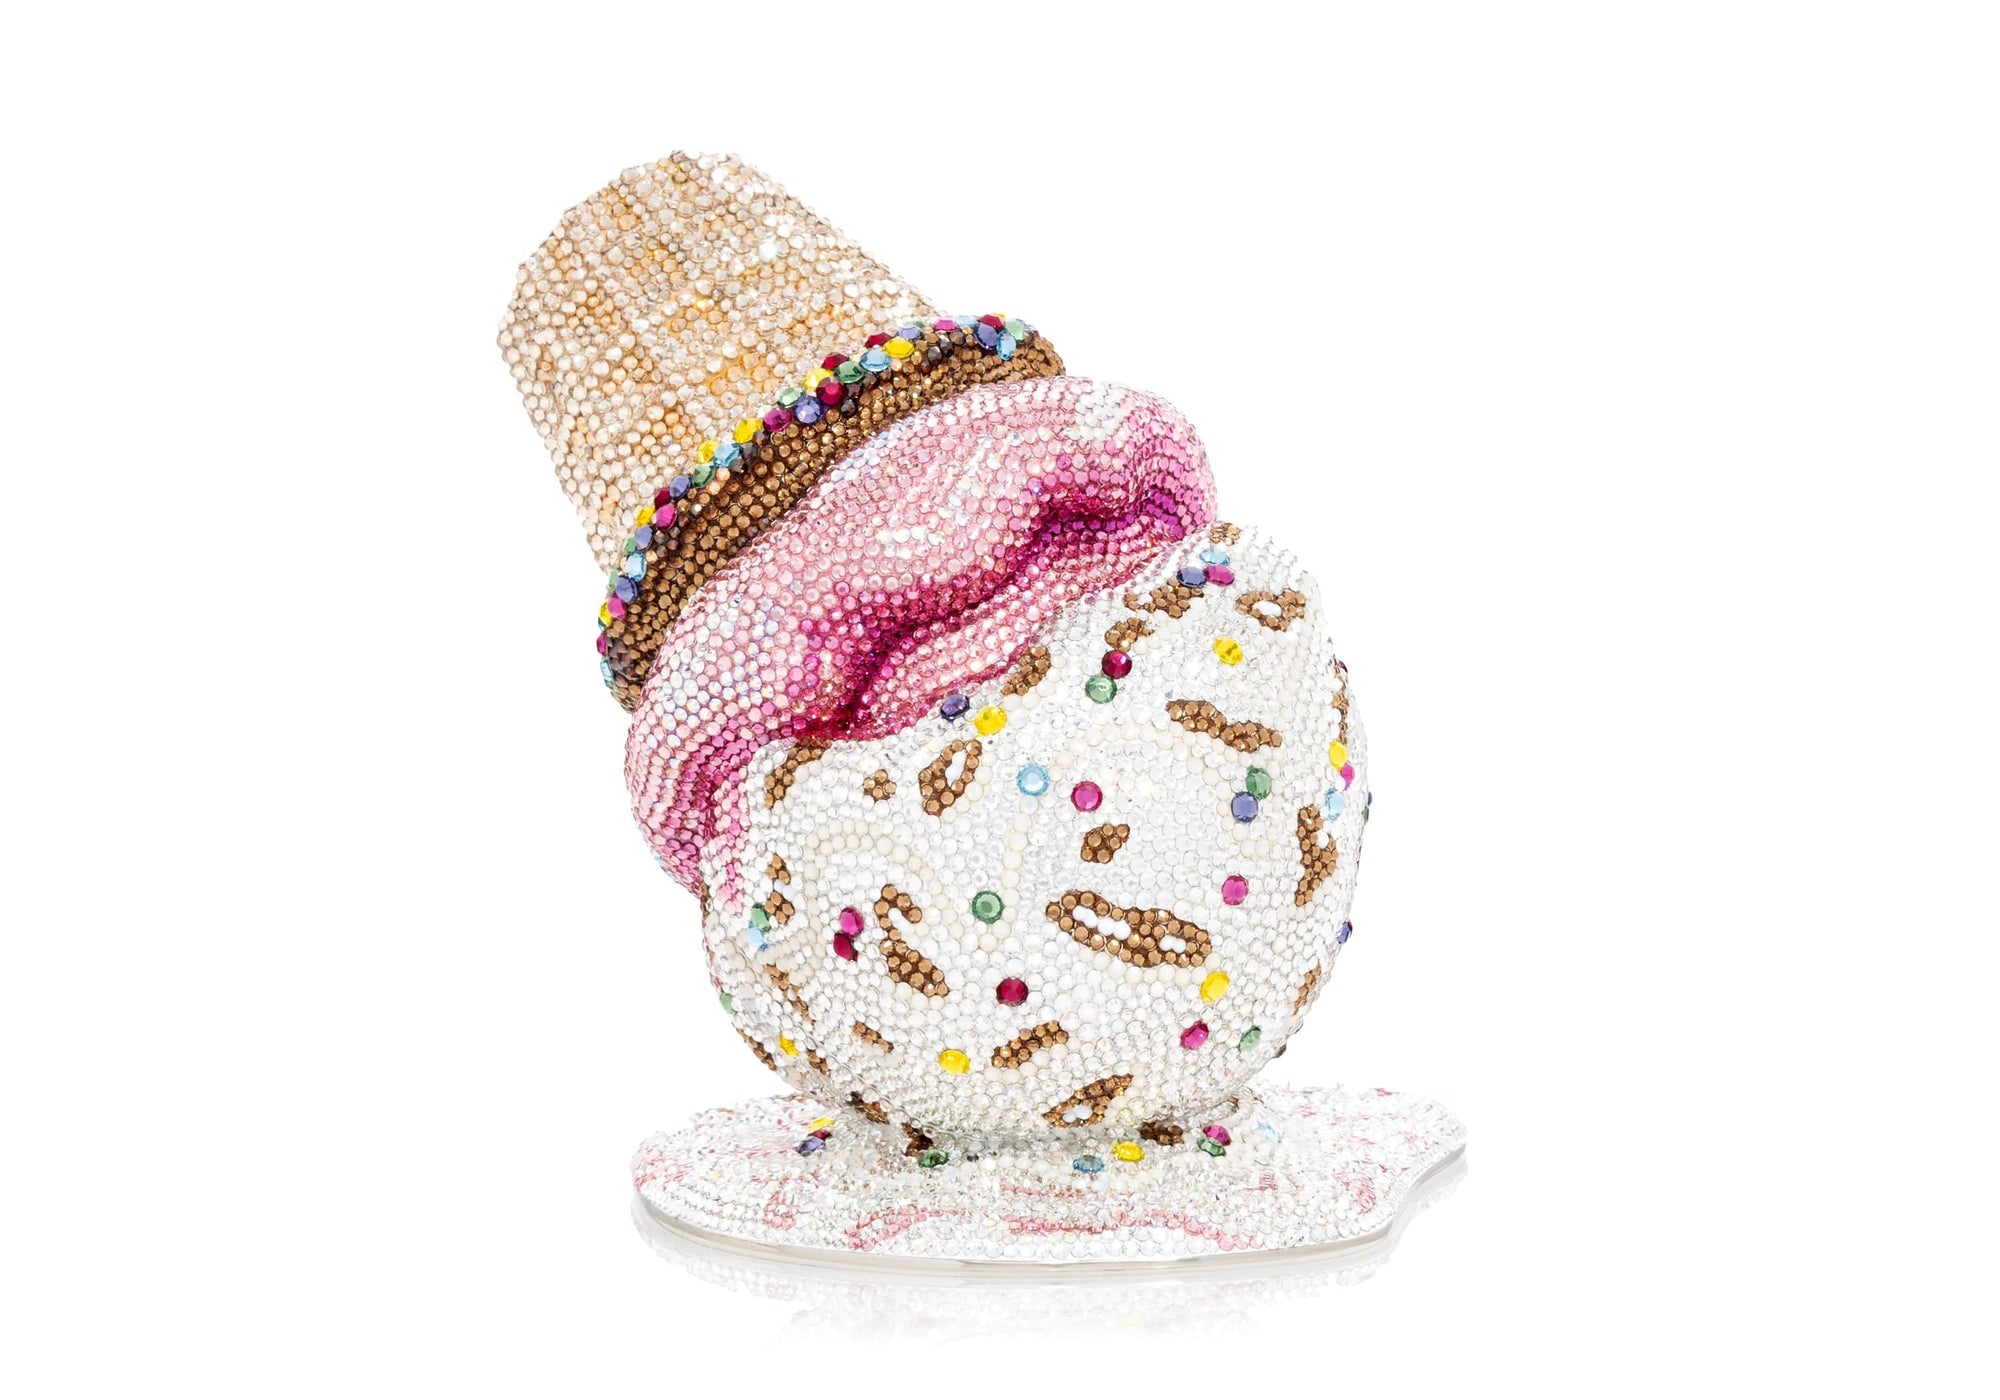 Judith Leiber cupcake pursei wish i could afford it!!!!